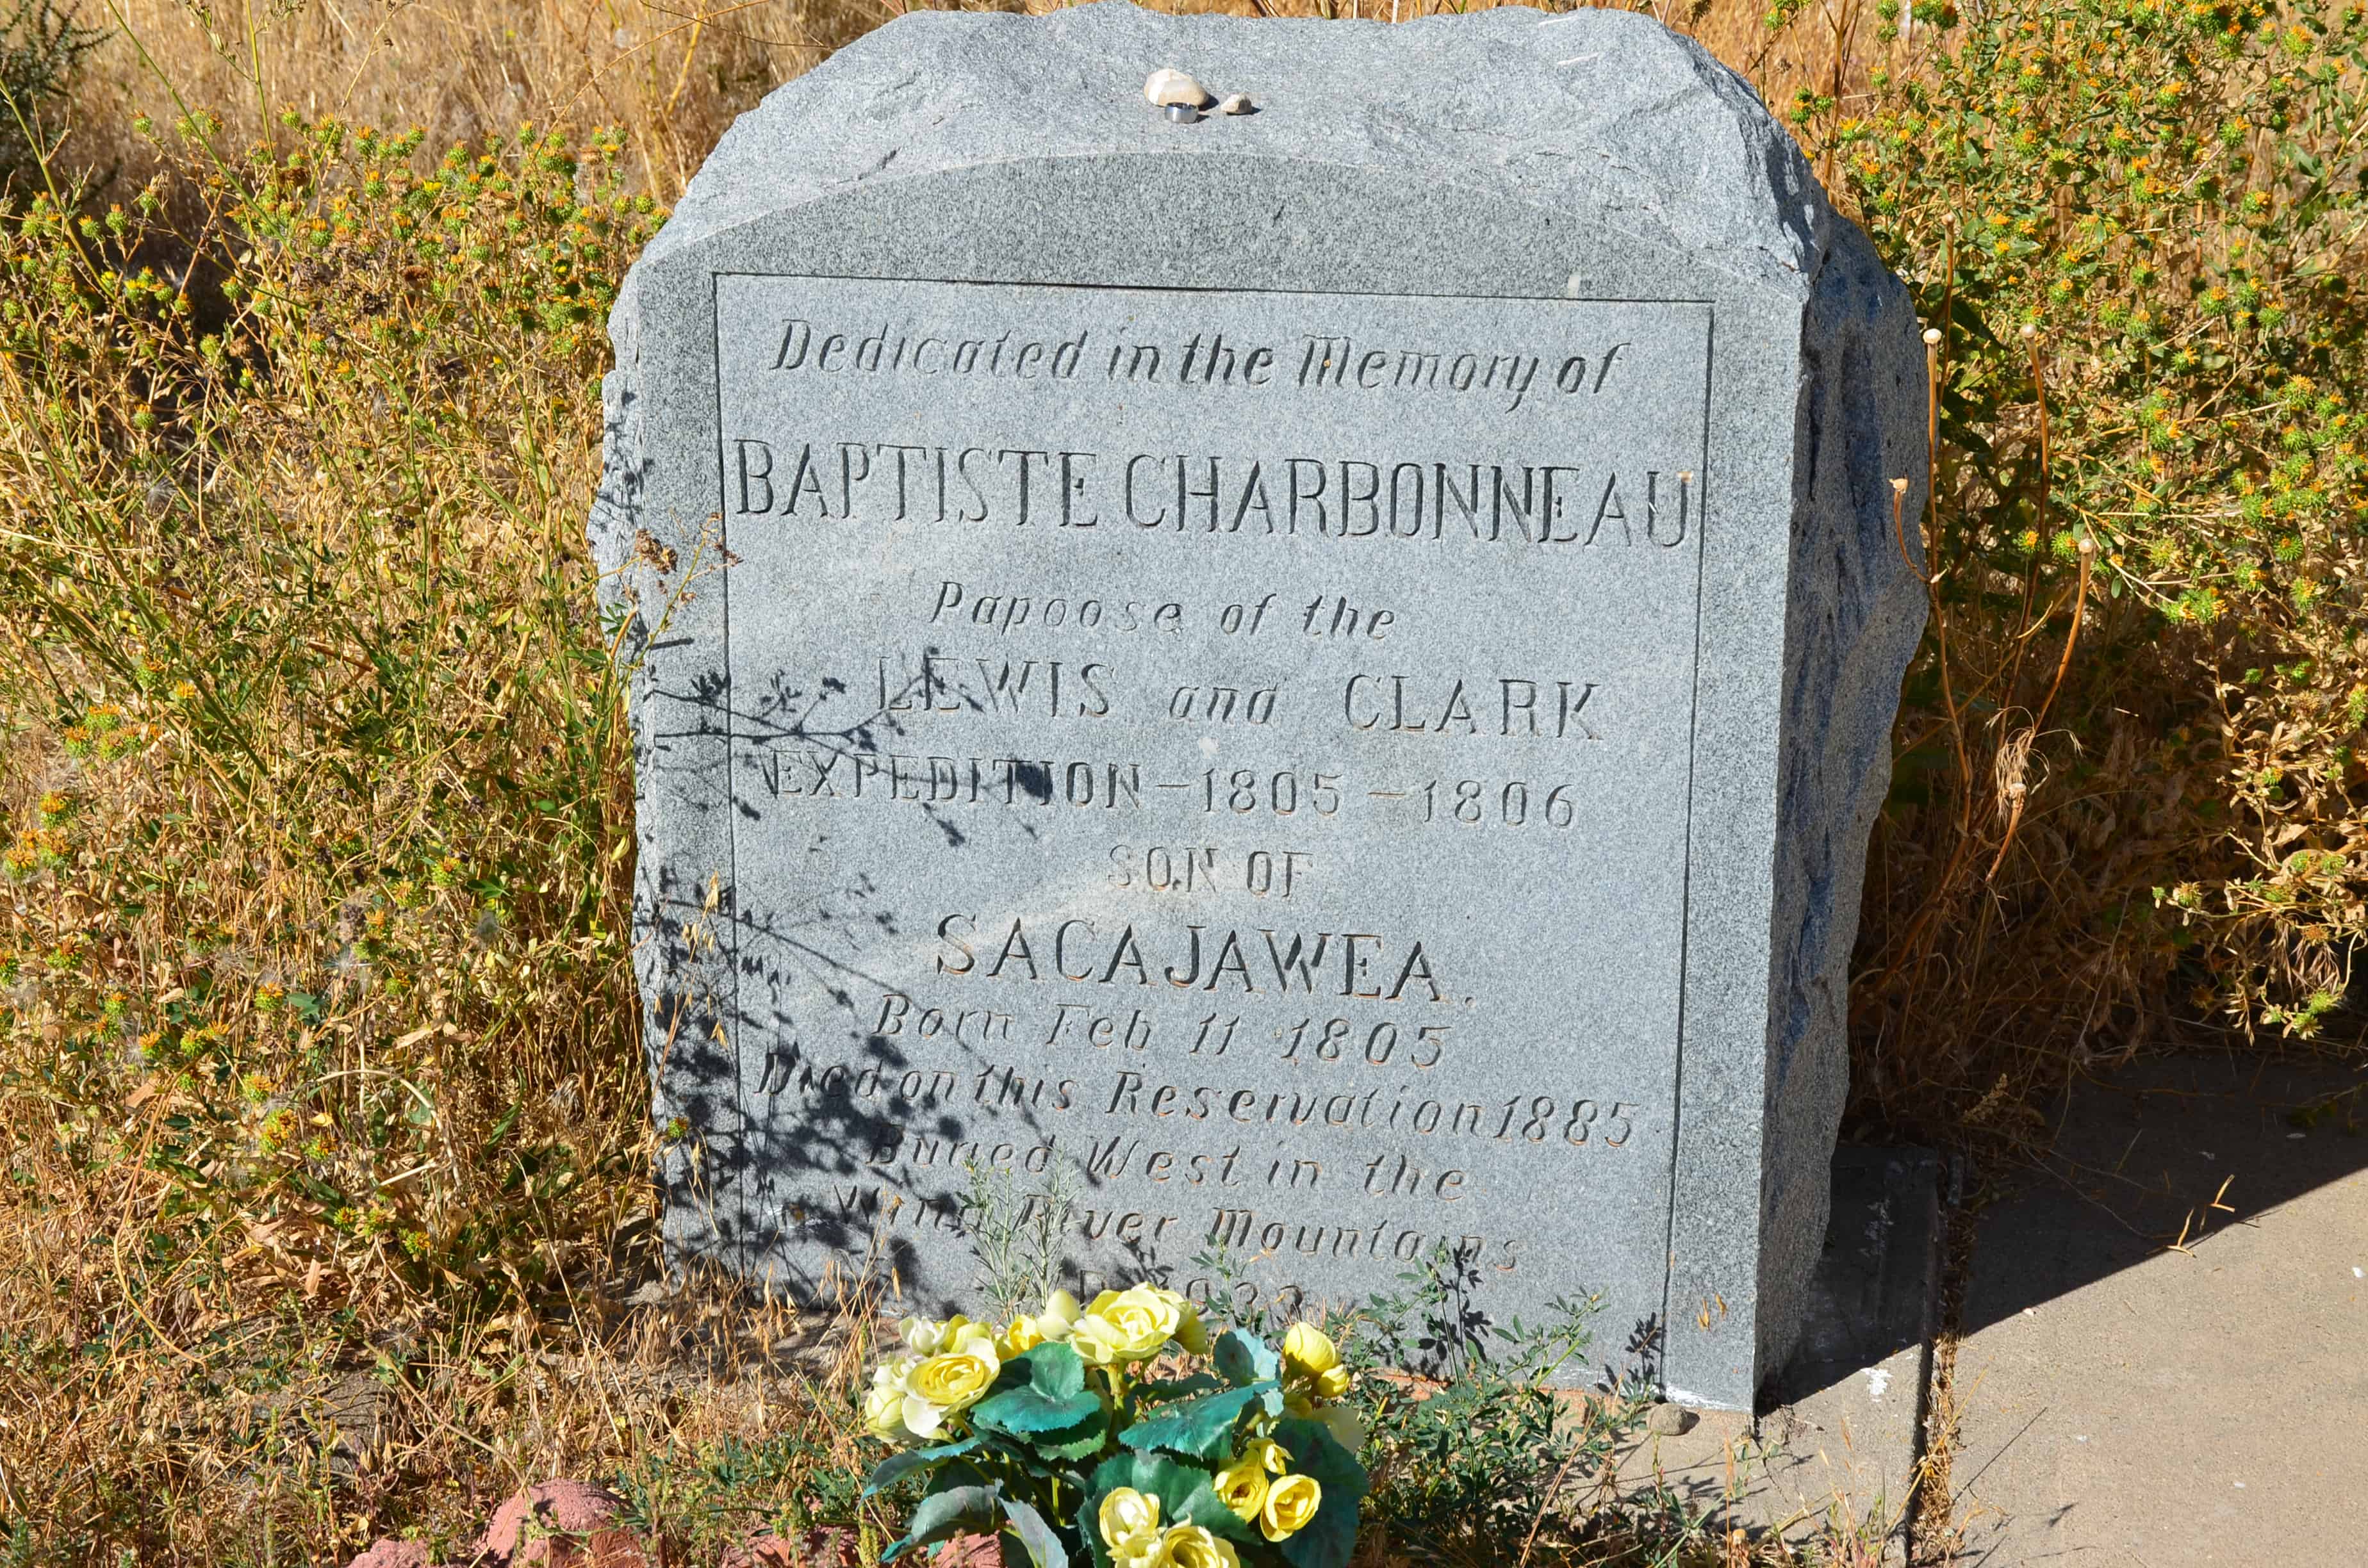 Monument to Jean-Baptiste Charbonneau at the Sacajawea gravesite in Fort Washakie, Wyoming